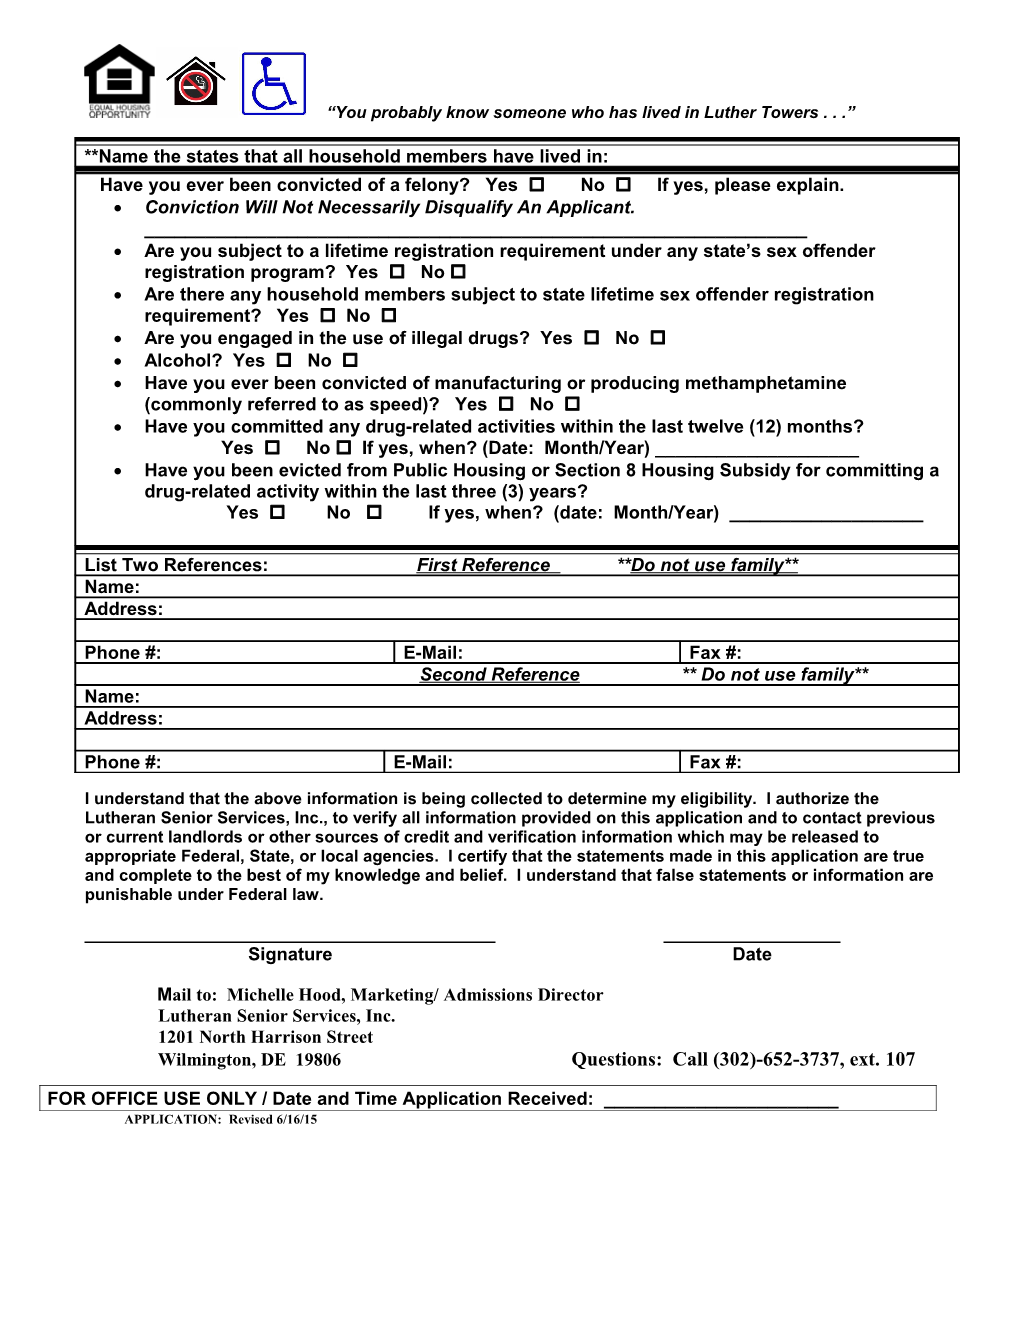 Please Complete Each Line on This Application If It Does Not Apply, Put N/A